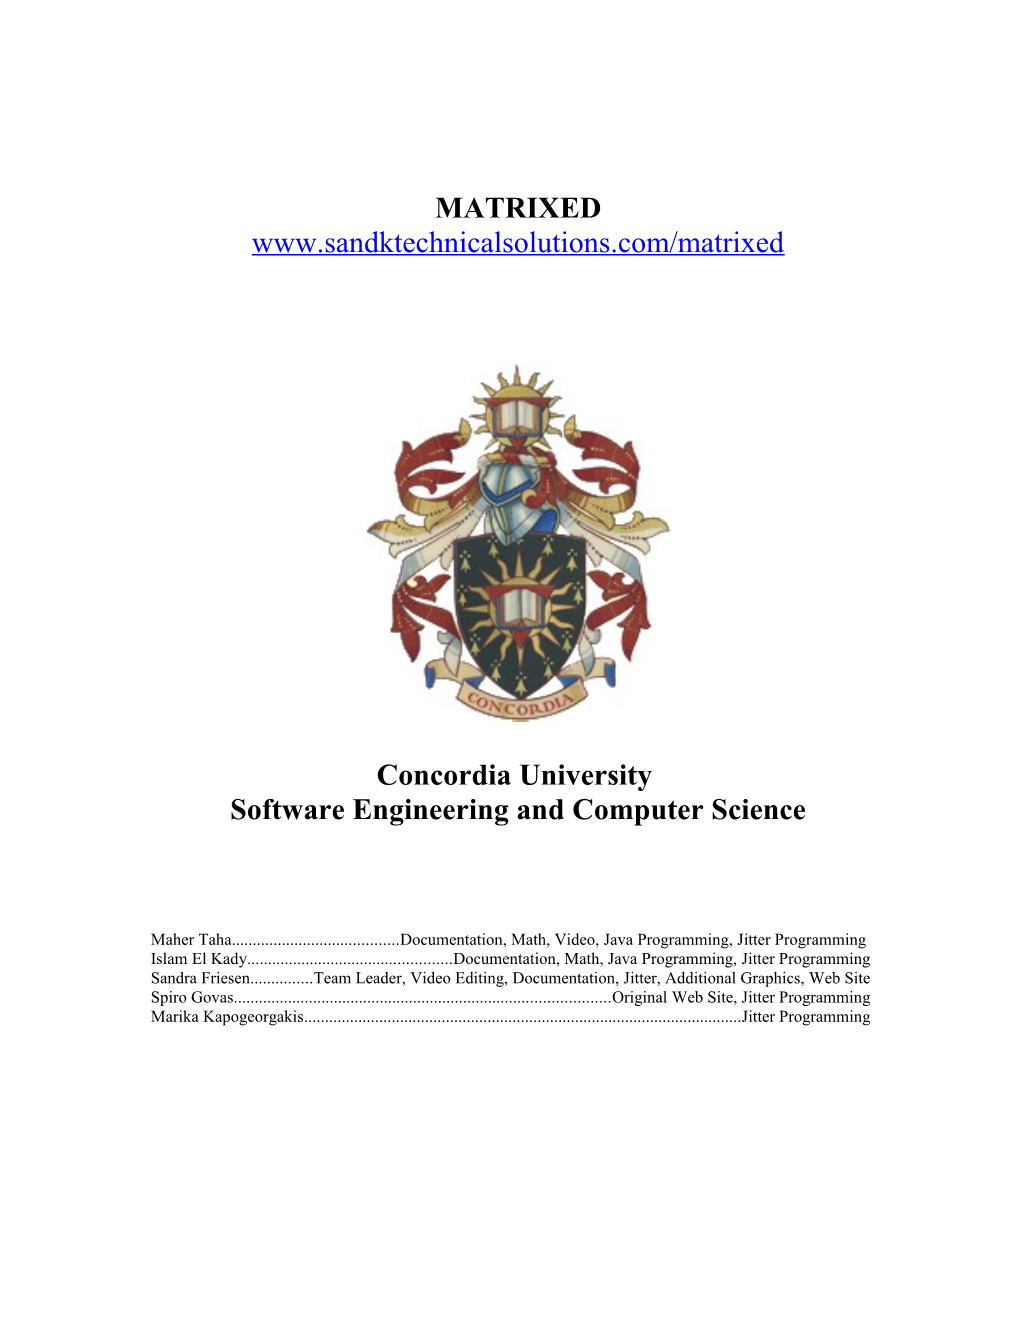 Software Engineering and Computer Science